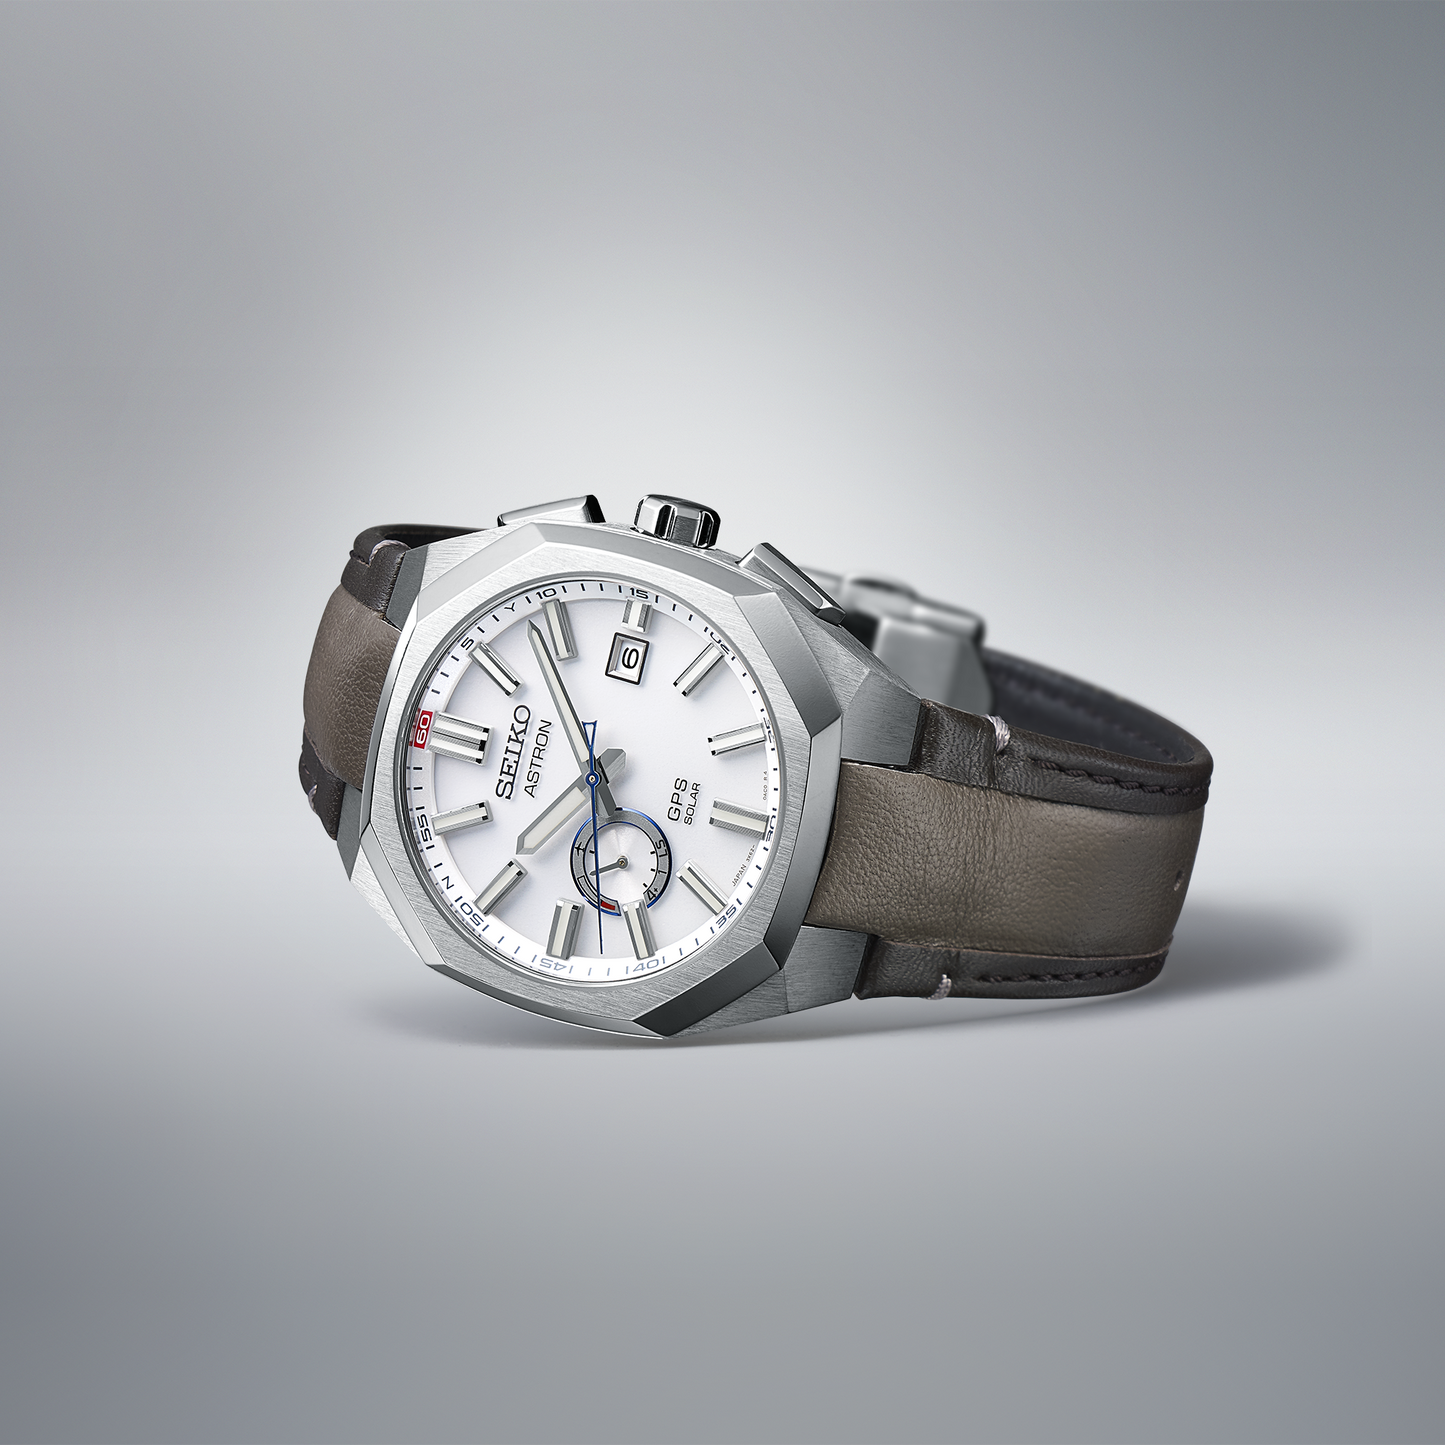 SSJ019 Seiko 110th Anniversary of Watchmaking Limited Edition